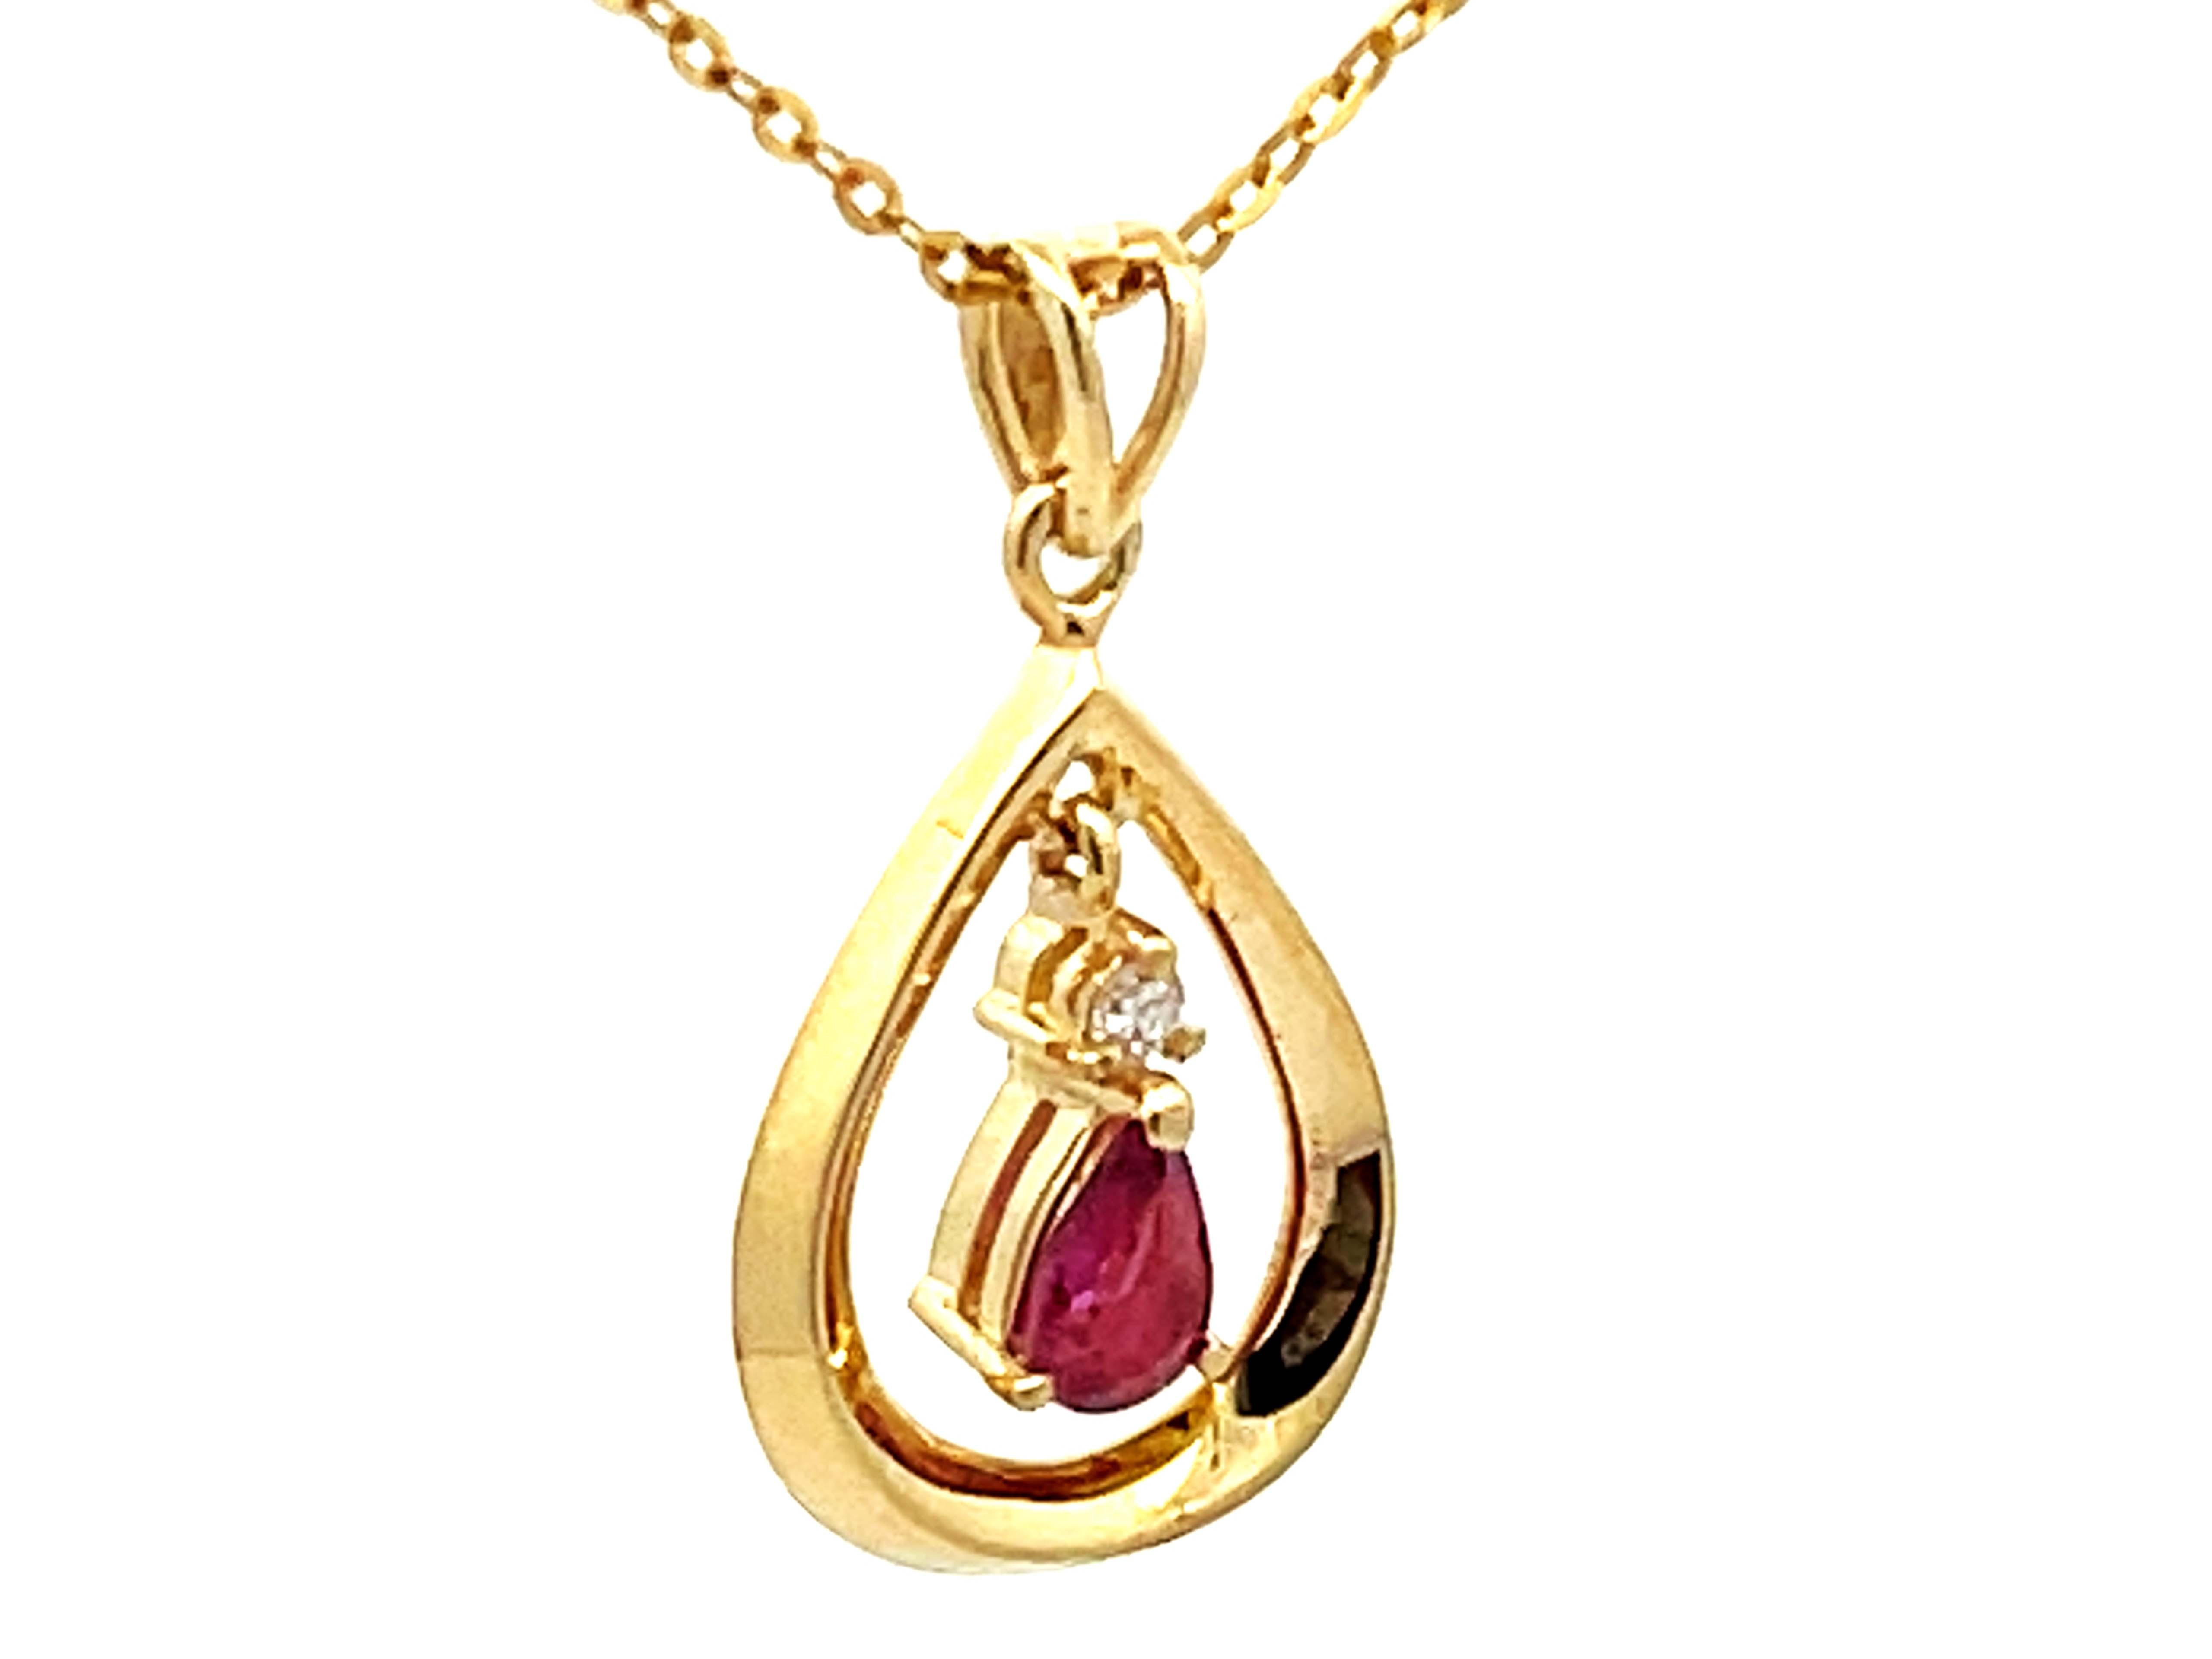 Modern Dangly Burma Ruby Necklace 14k Yellow Gold For Sale